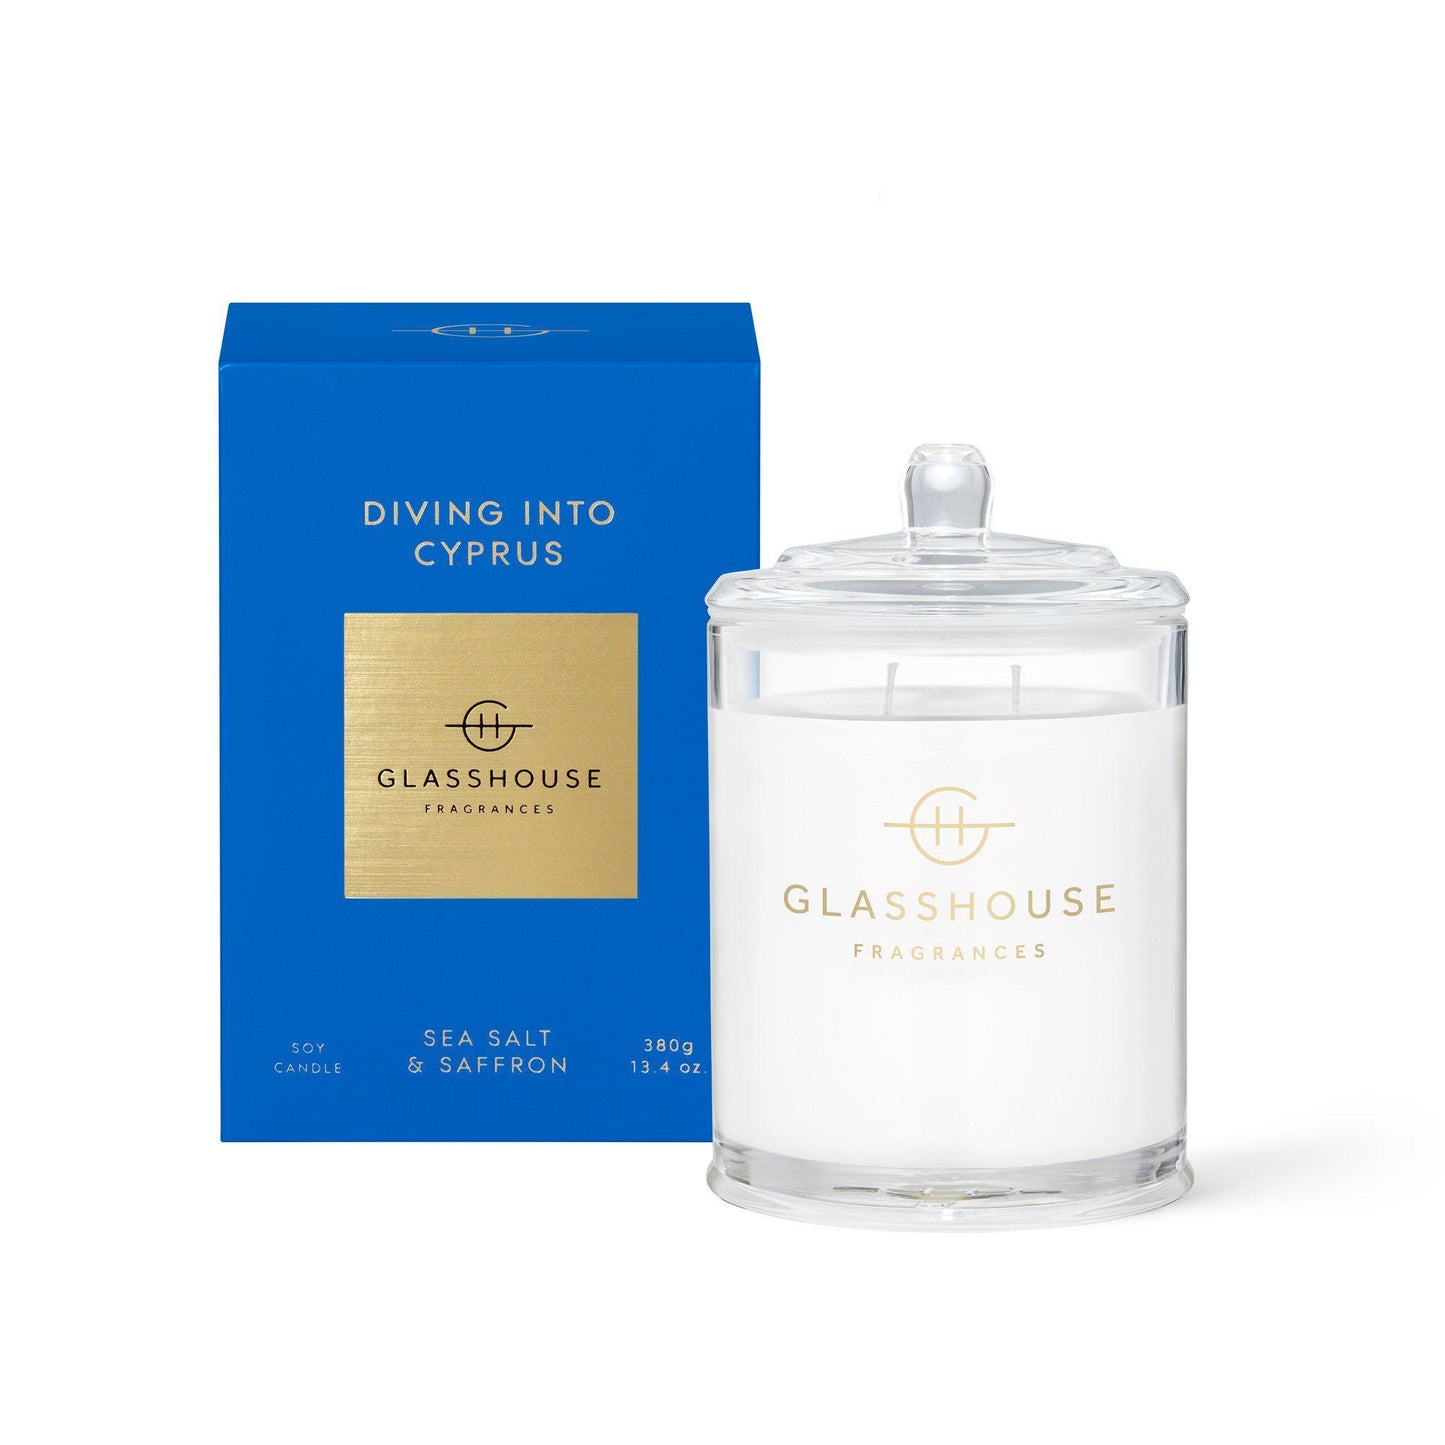 Candle 380g - Diving into Cyprus - Glasshouse Fragrances - FUDGE Gifts Home Lifestyle